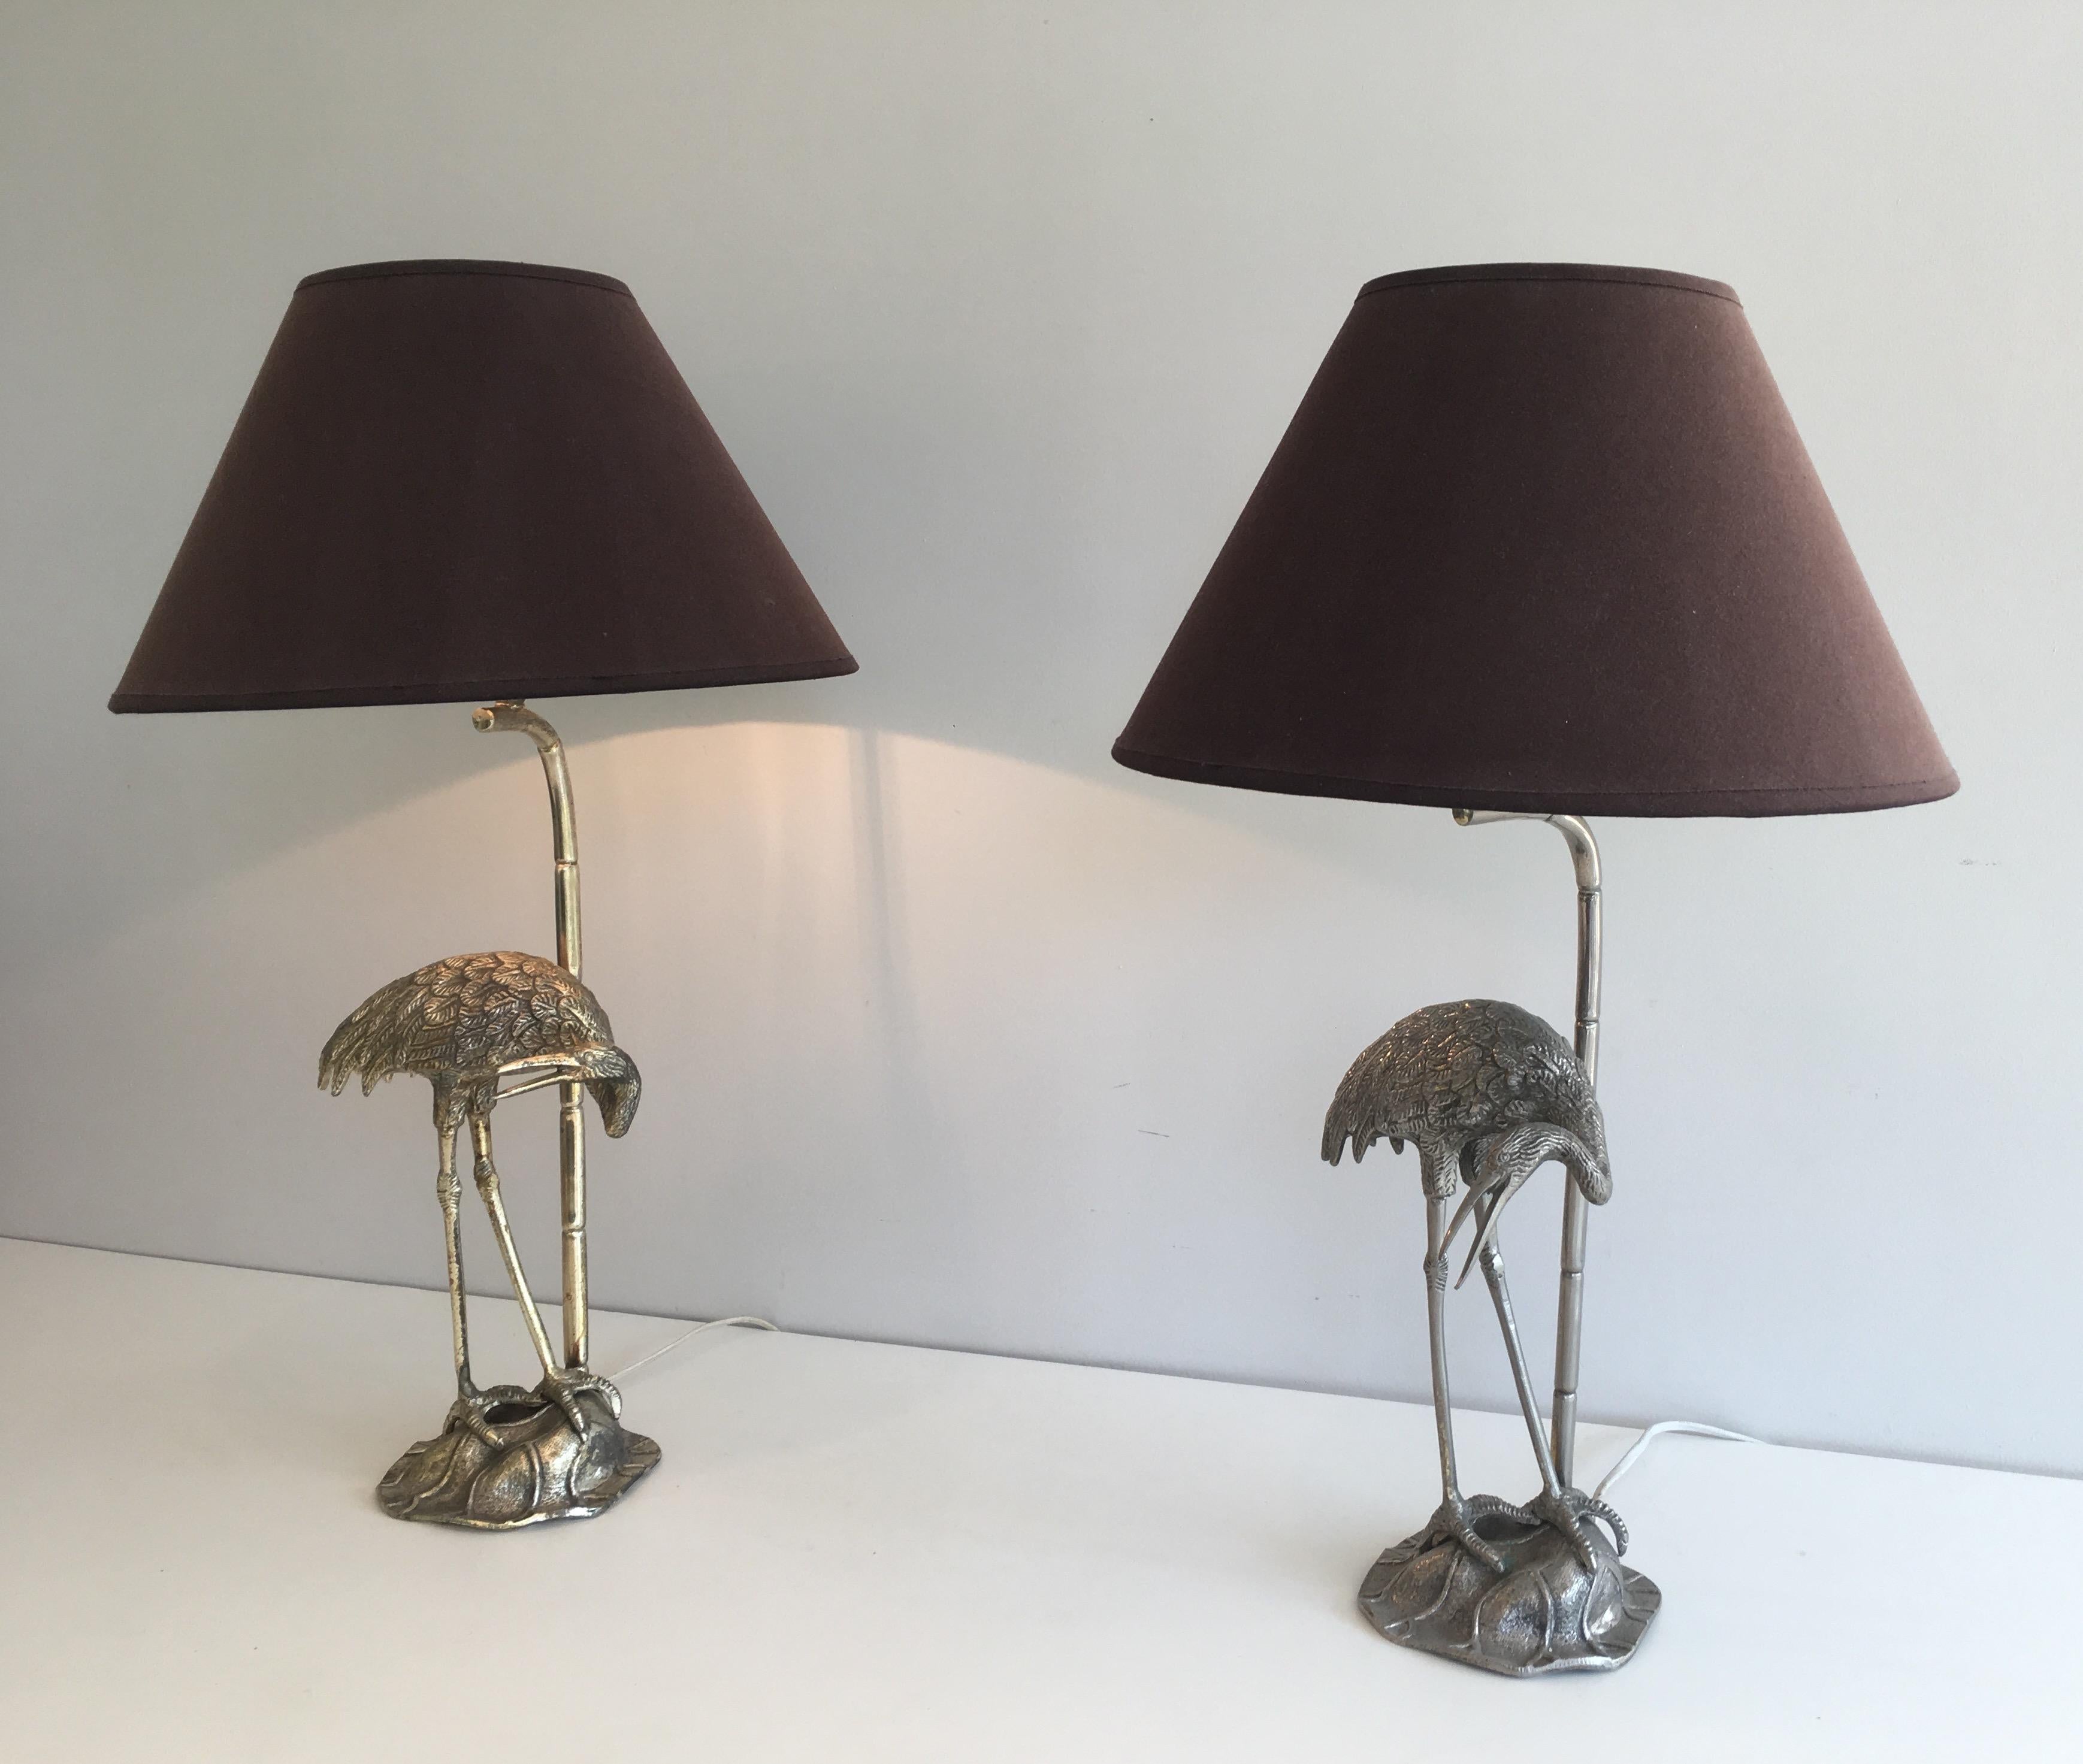 Neoclassical Pair of Silvered Herons Table Lamps. French work by Maison Bagués. Circa 1940